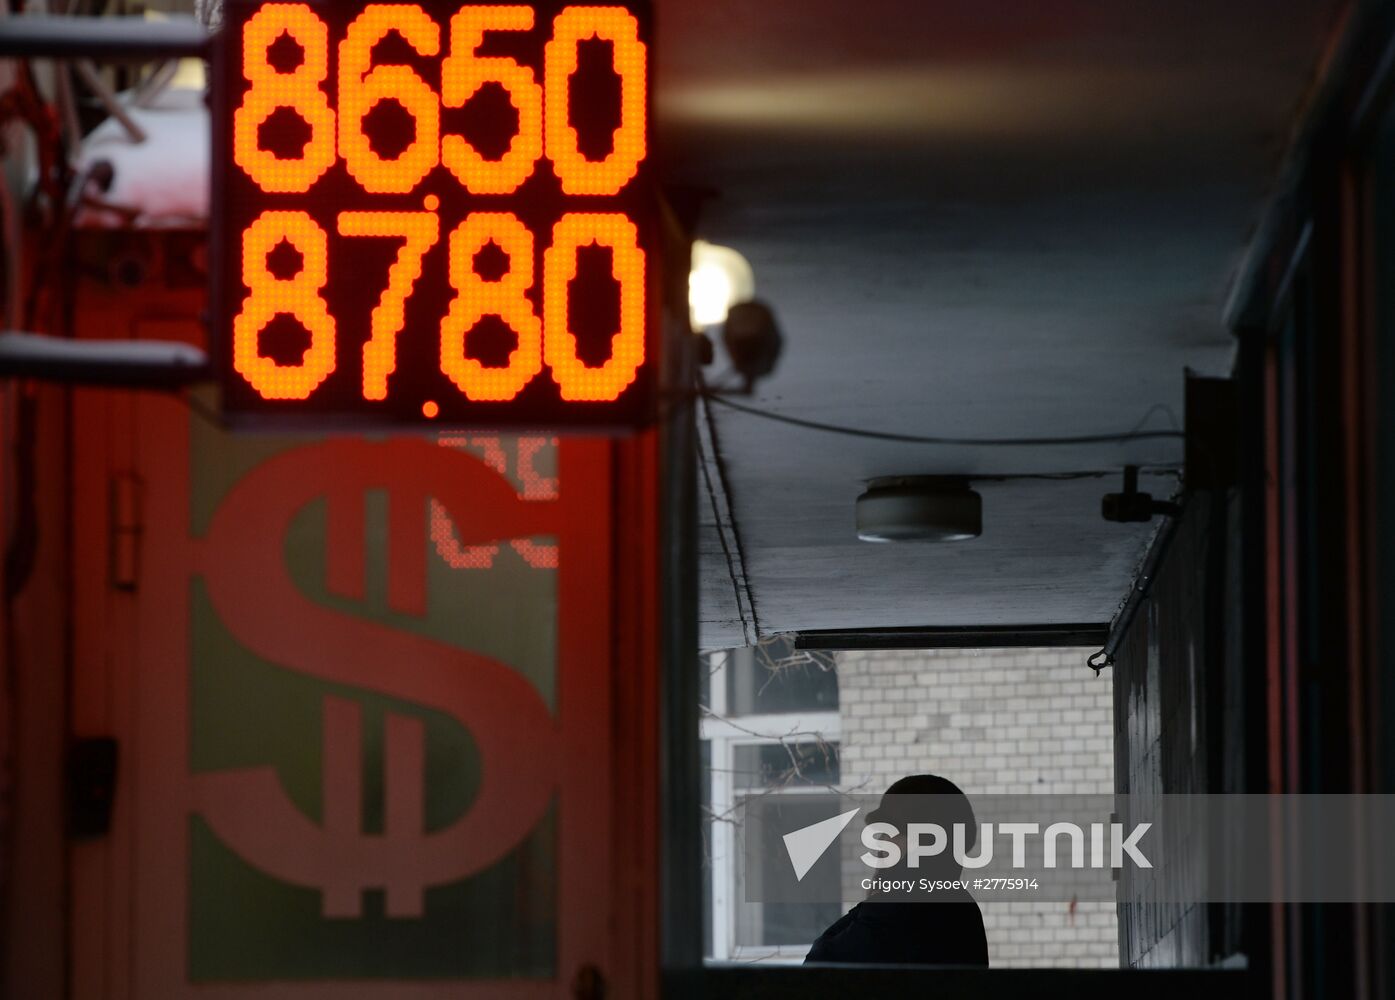 Currency exchange rates in Moscow